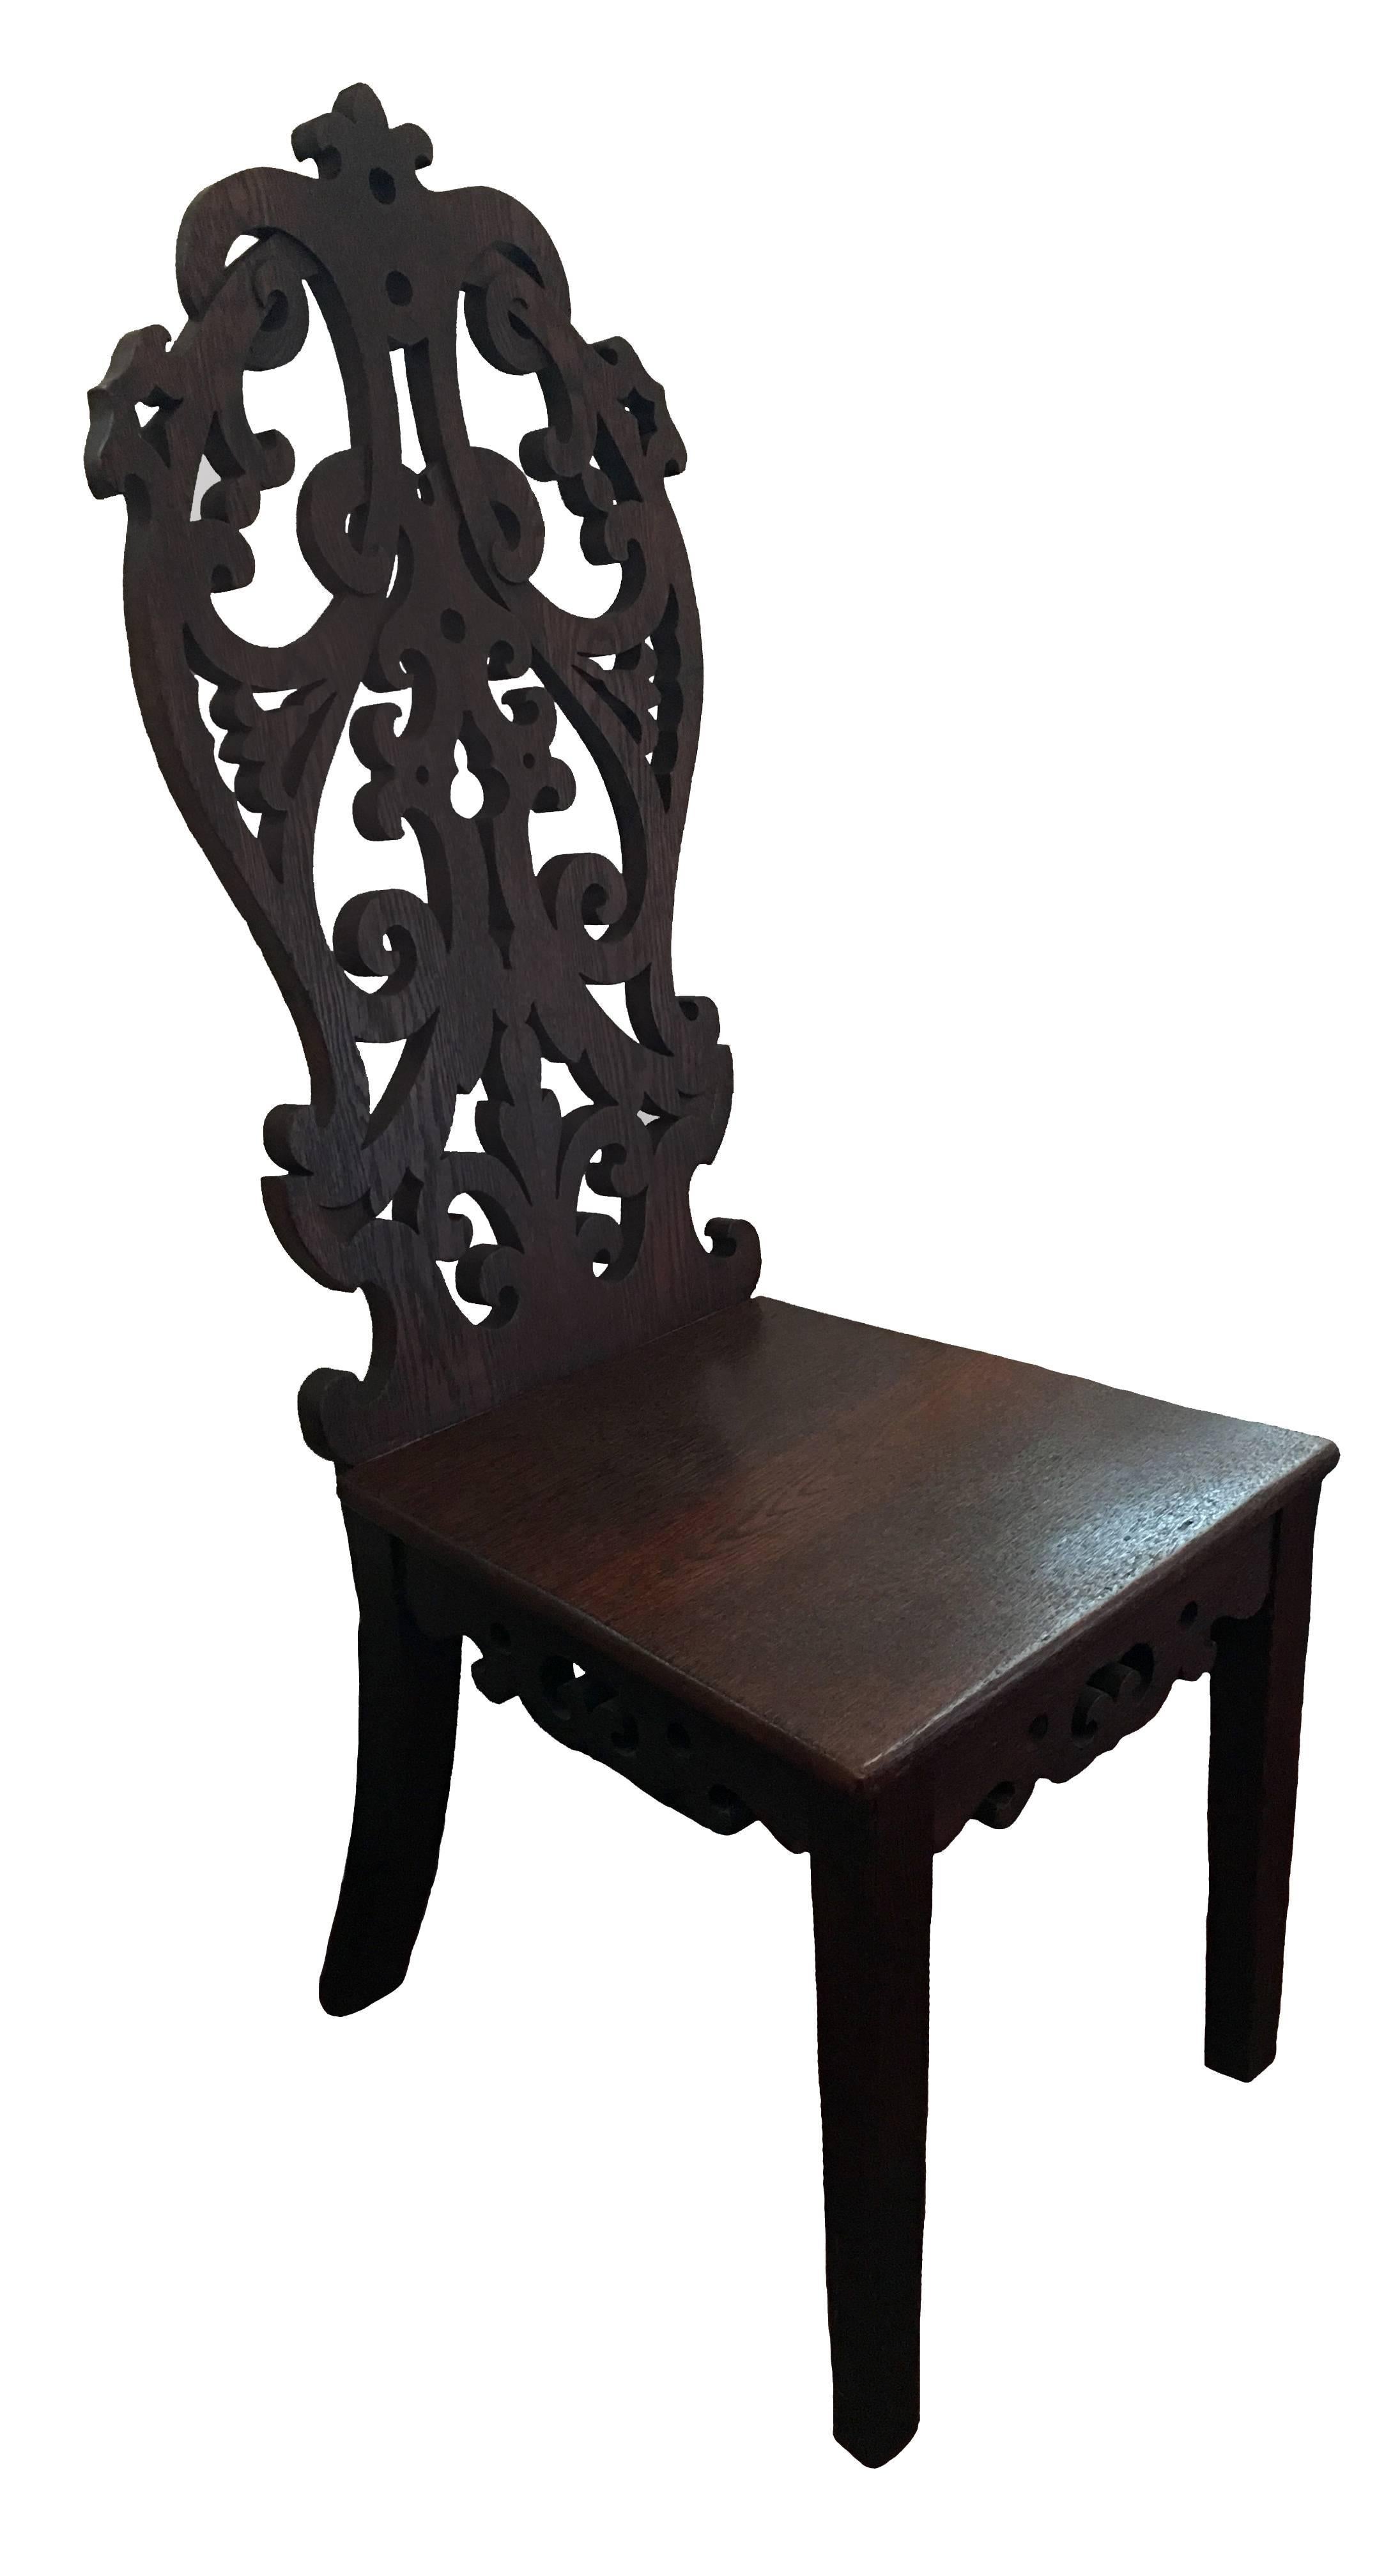 Pair of 1950s Haitian carved wood chairs. Hand-carved from a native hardwood. Commissioned by their current owner in 1957, while living outside of Port-au-Prince. Chairs have been recently reconditioned and polished.